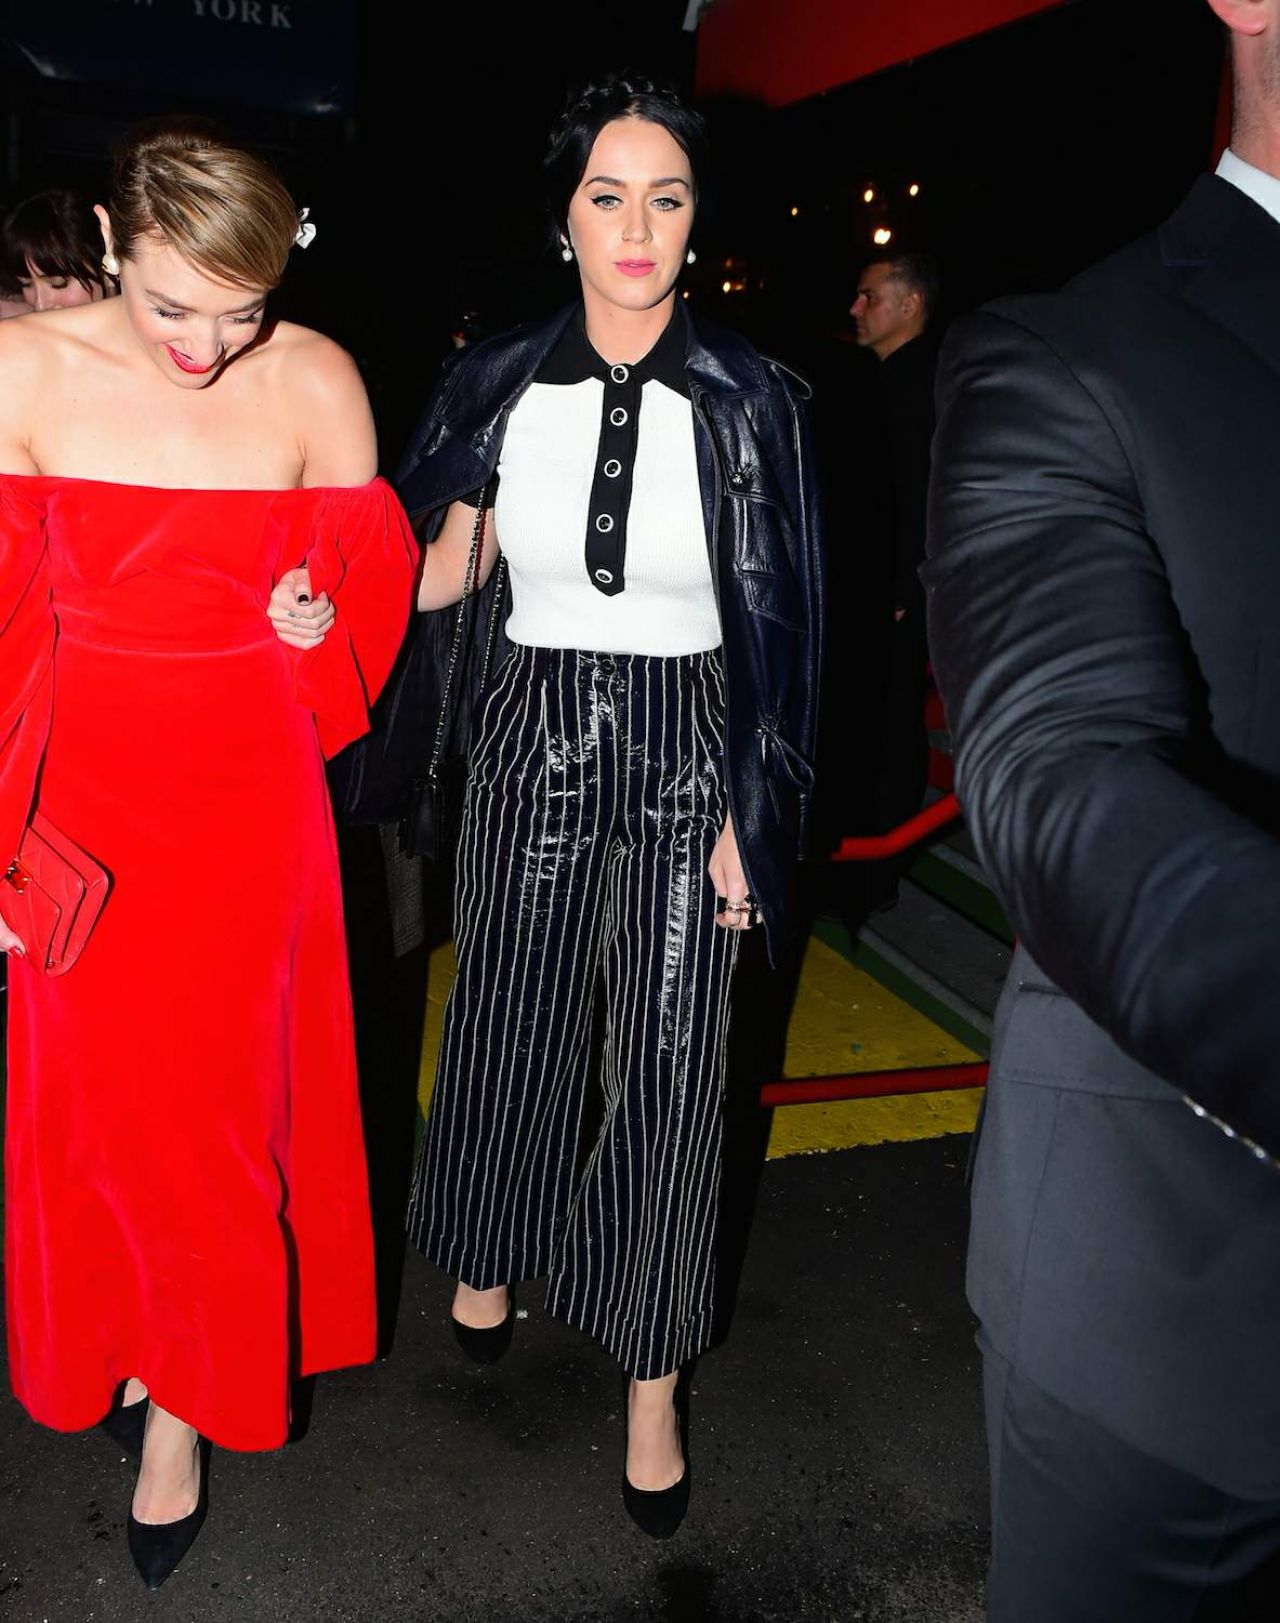 Katy Perry at Karl Lagerfeld's Chanel Boat Party in New York City ...